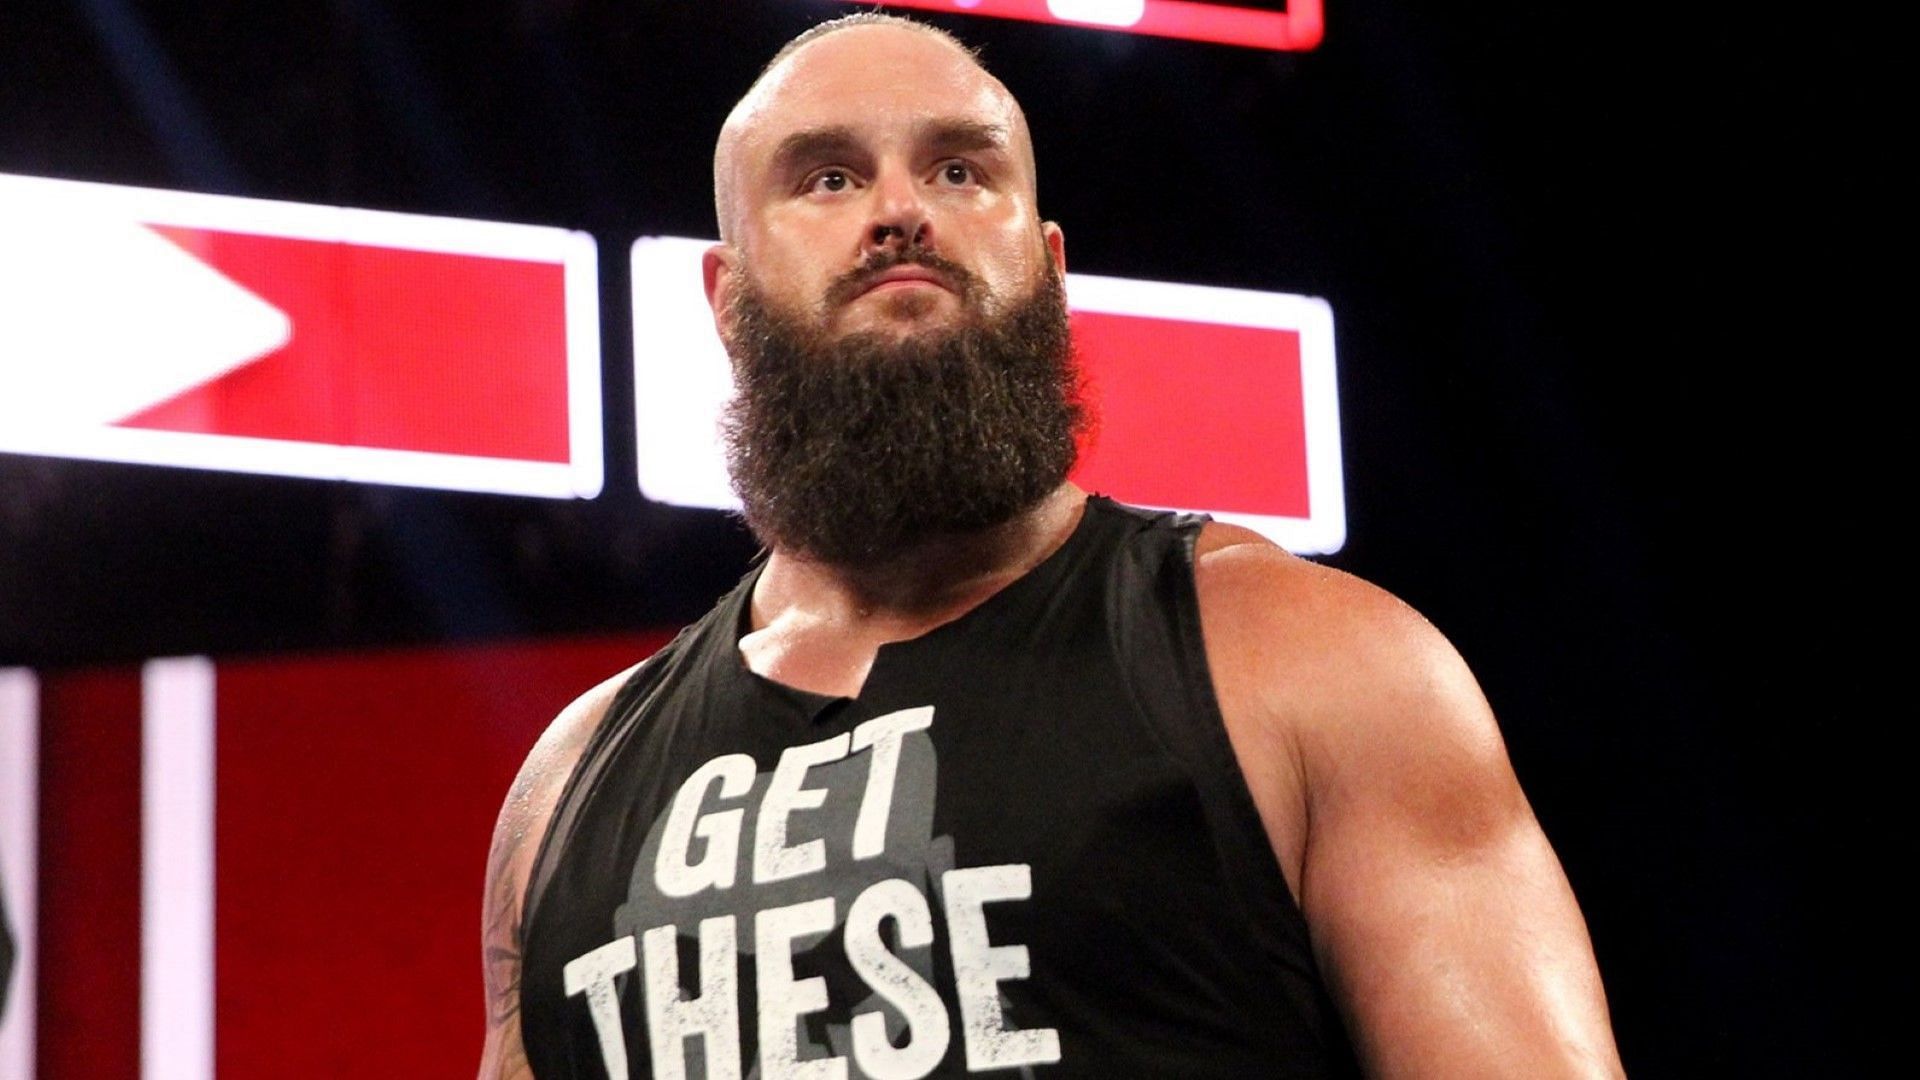 Braun Strowman stands tall for the crowd on WWE RAW